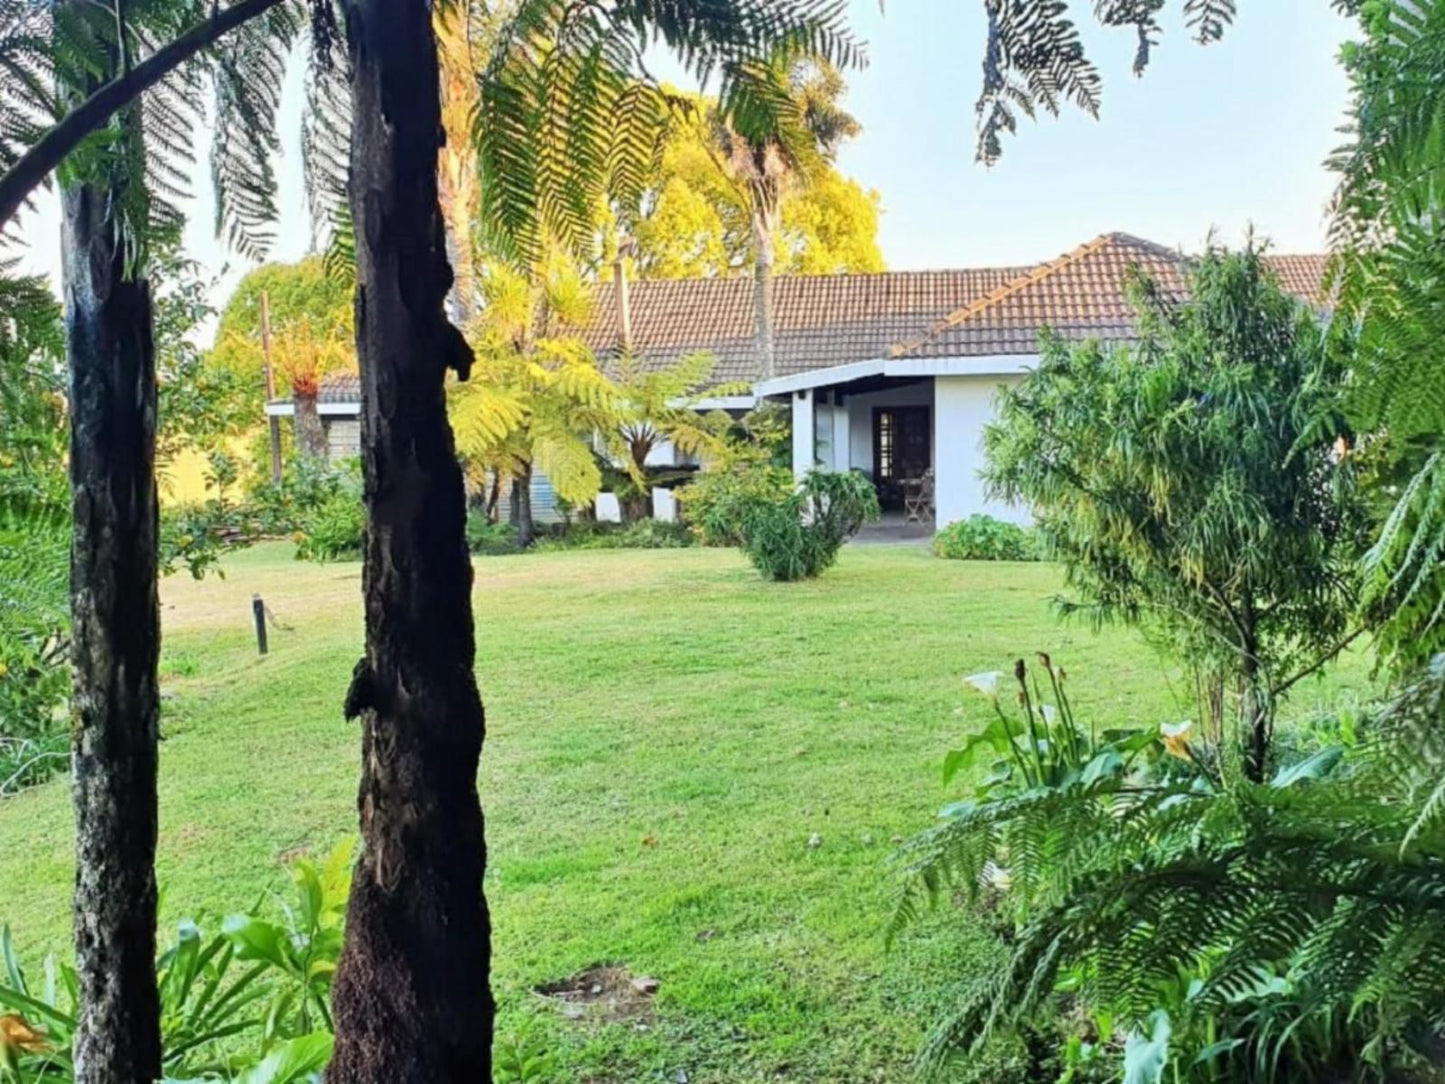 Paradise View Guesthouse Graskop Mpumalanga South Africa House, Building, Architecture, Palm Tree, Plant, Nature, Wood